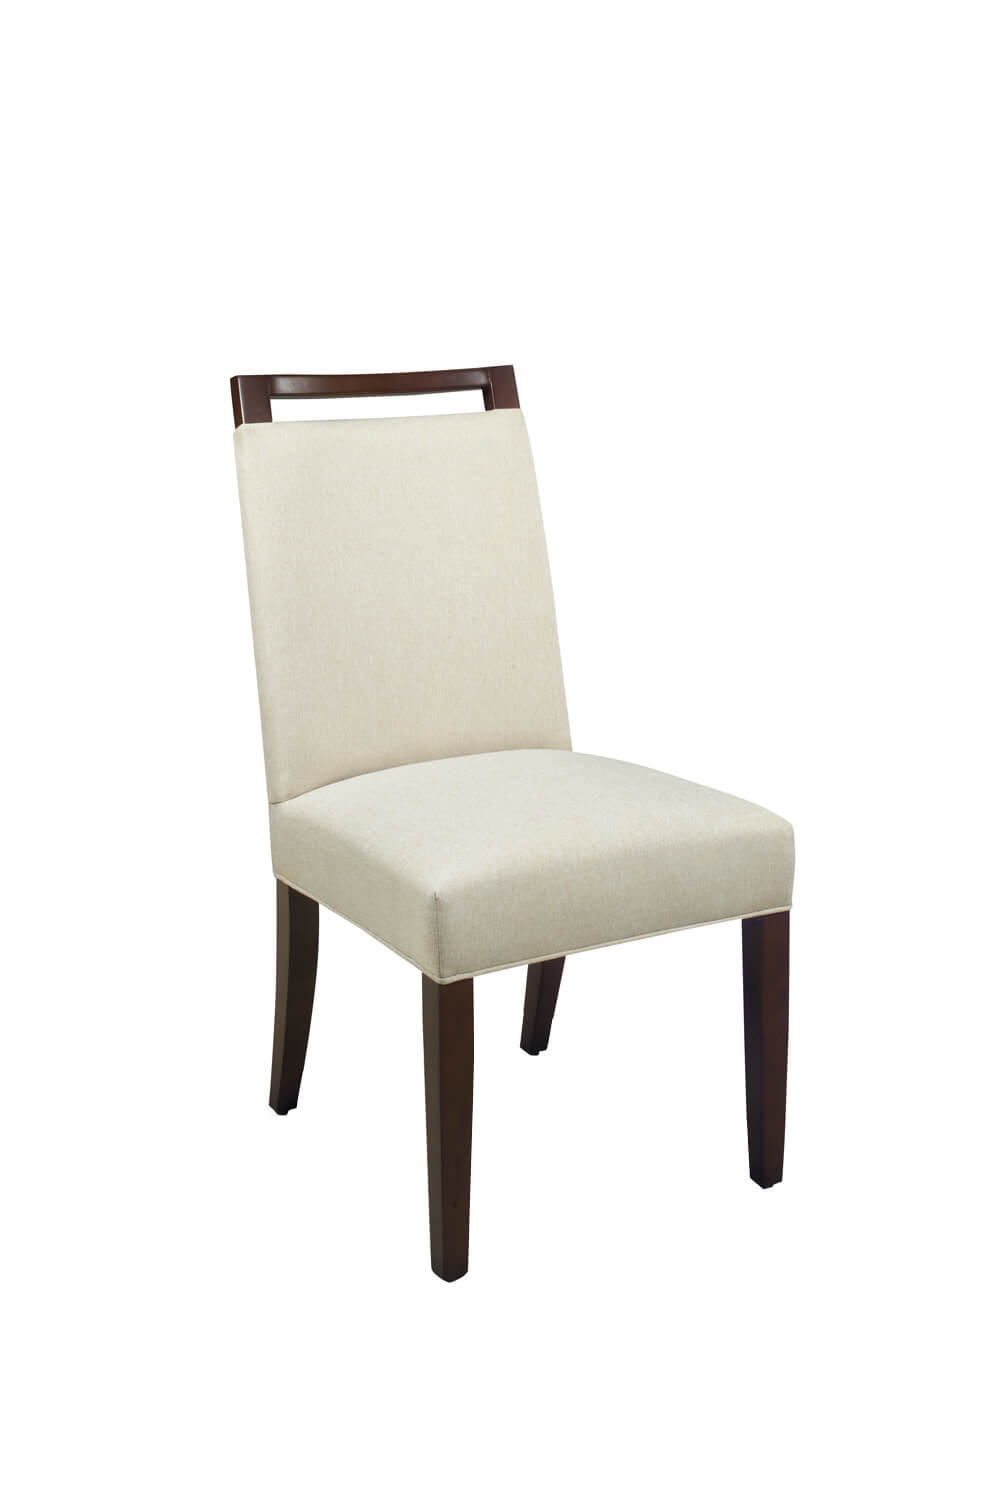 #6622-CH Modern Upholstered Wood Dining Chair